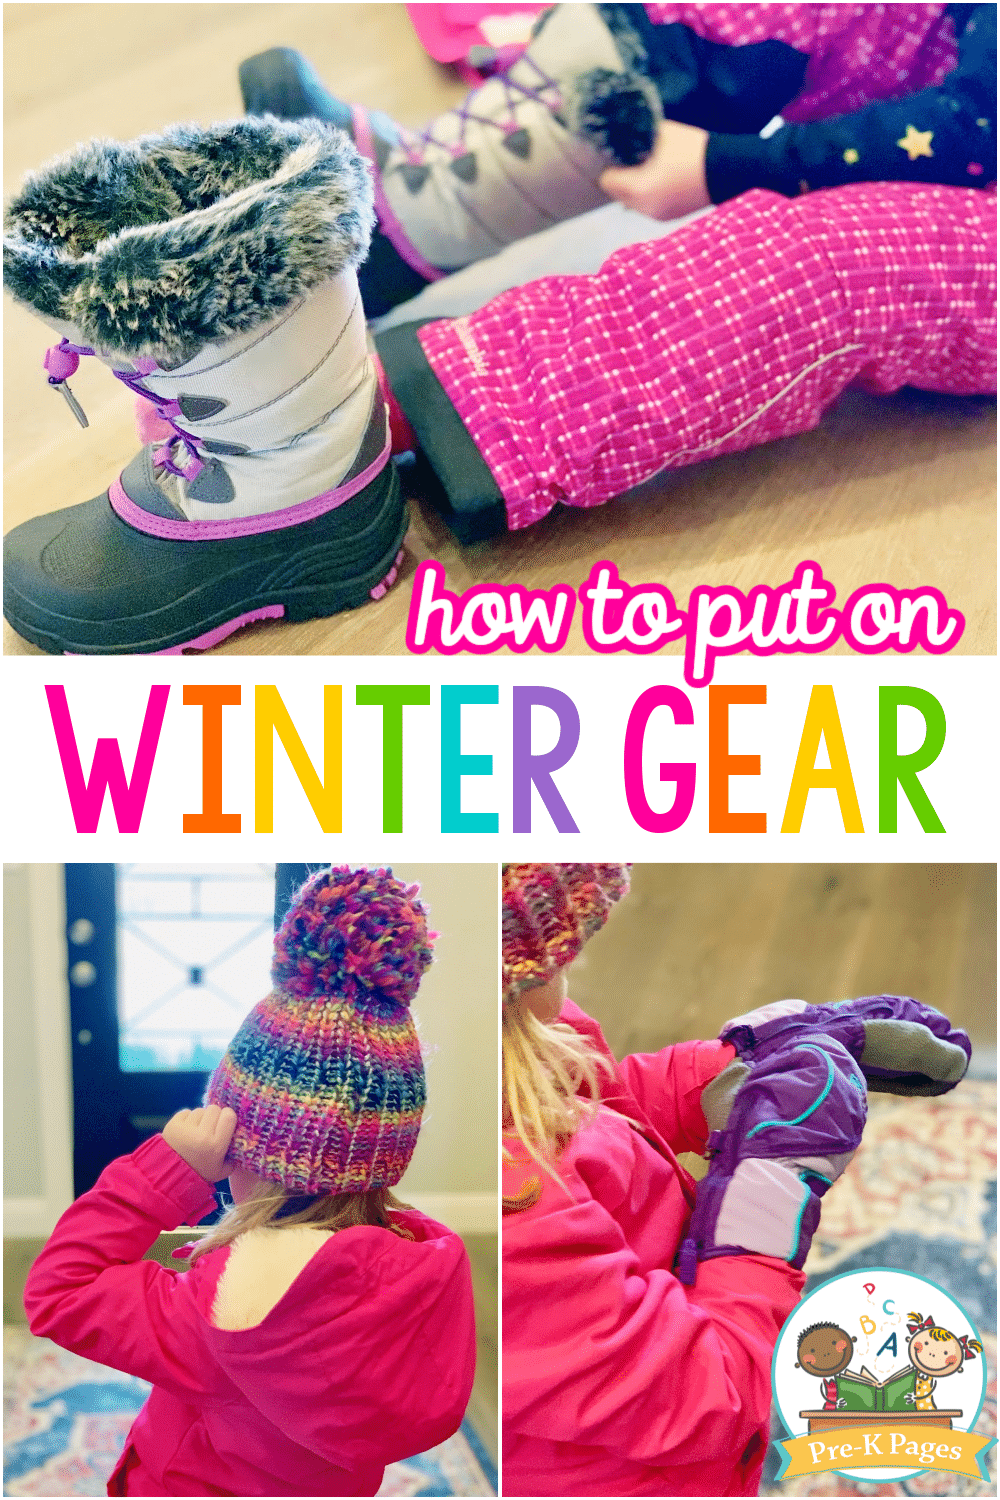 How to Put on Winter Gear